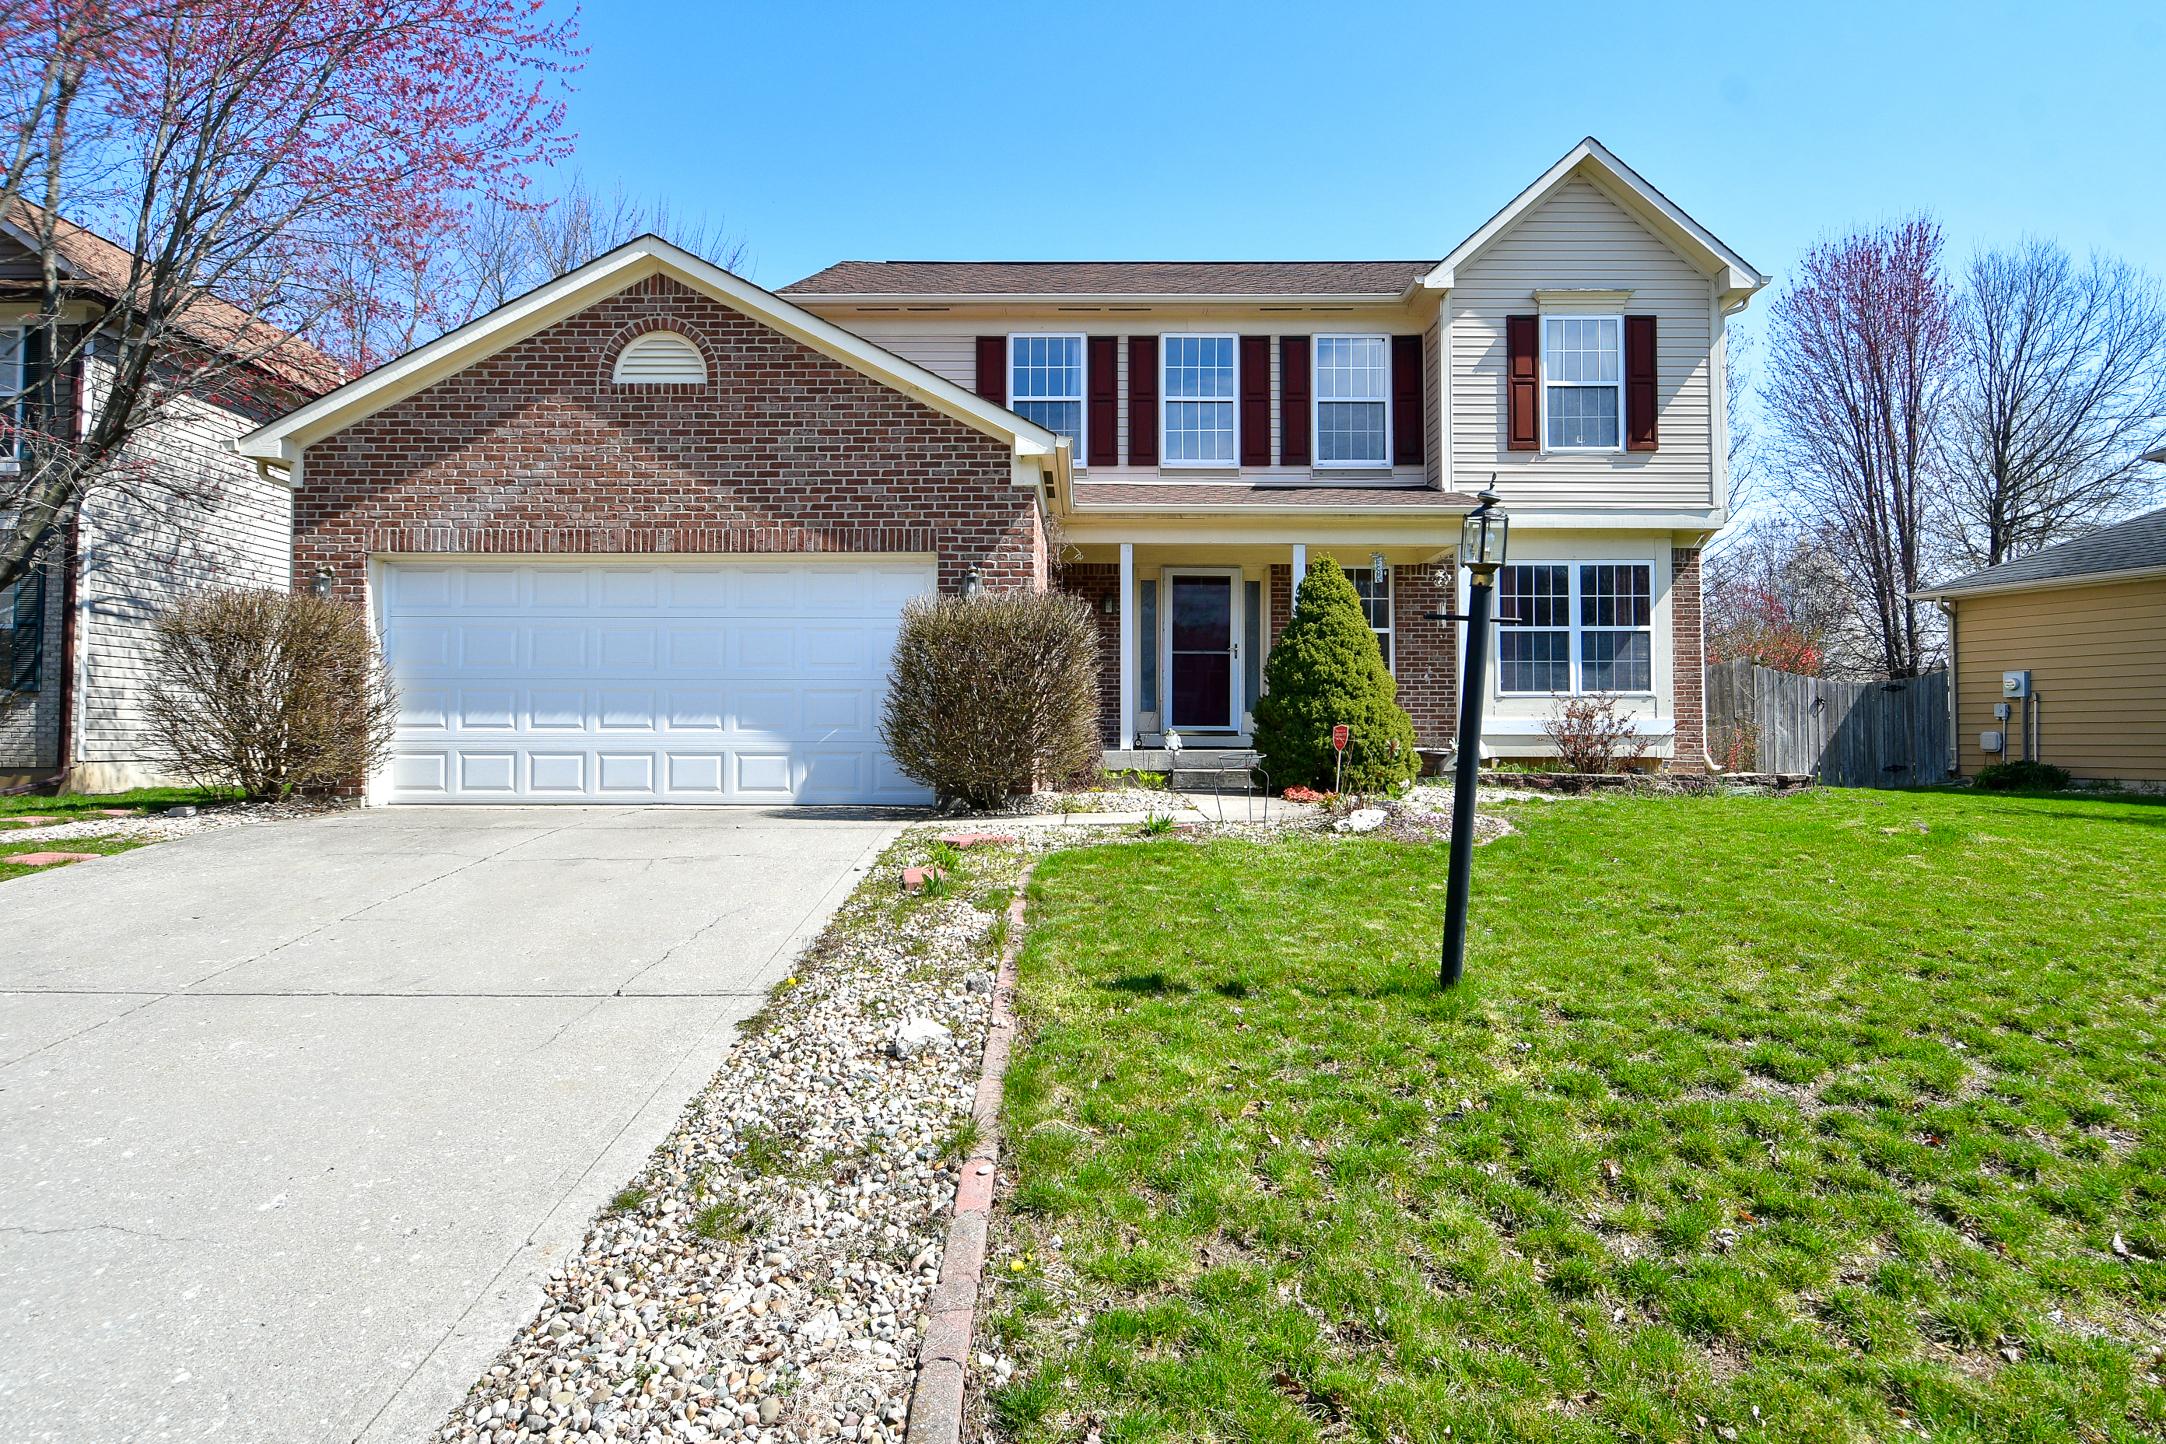 Photo one of 6944 Antelope Dr Indianapolis IN 46278 | MLS 21971780